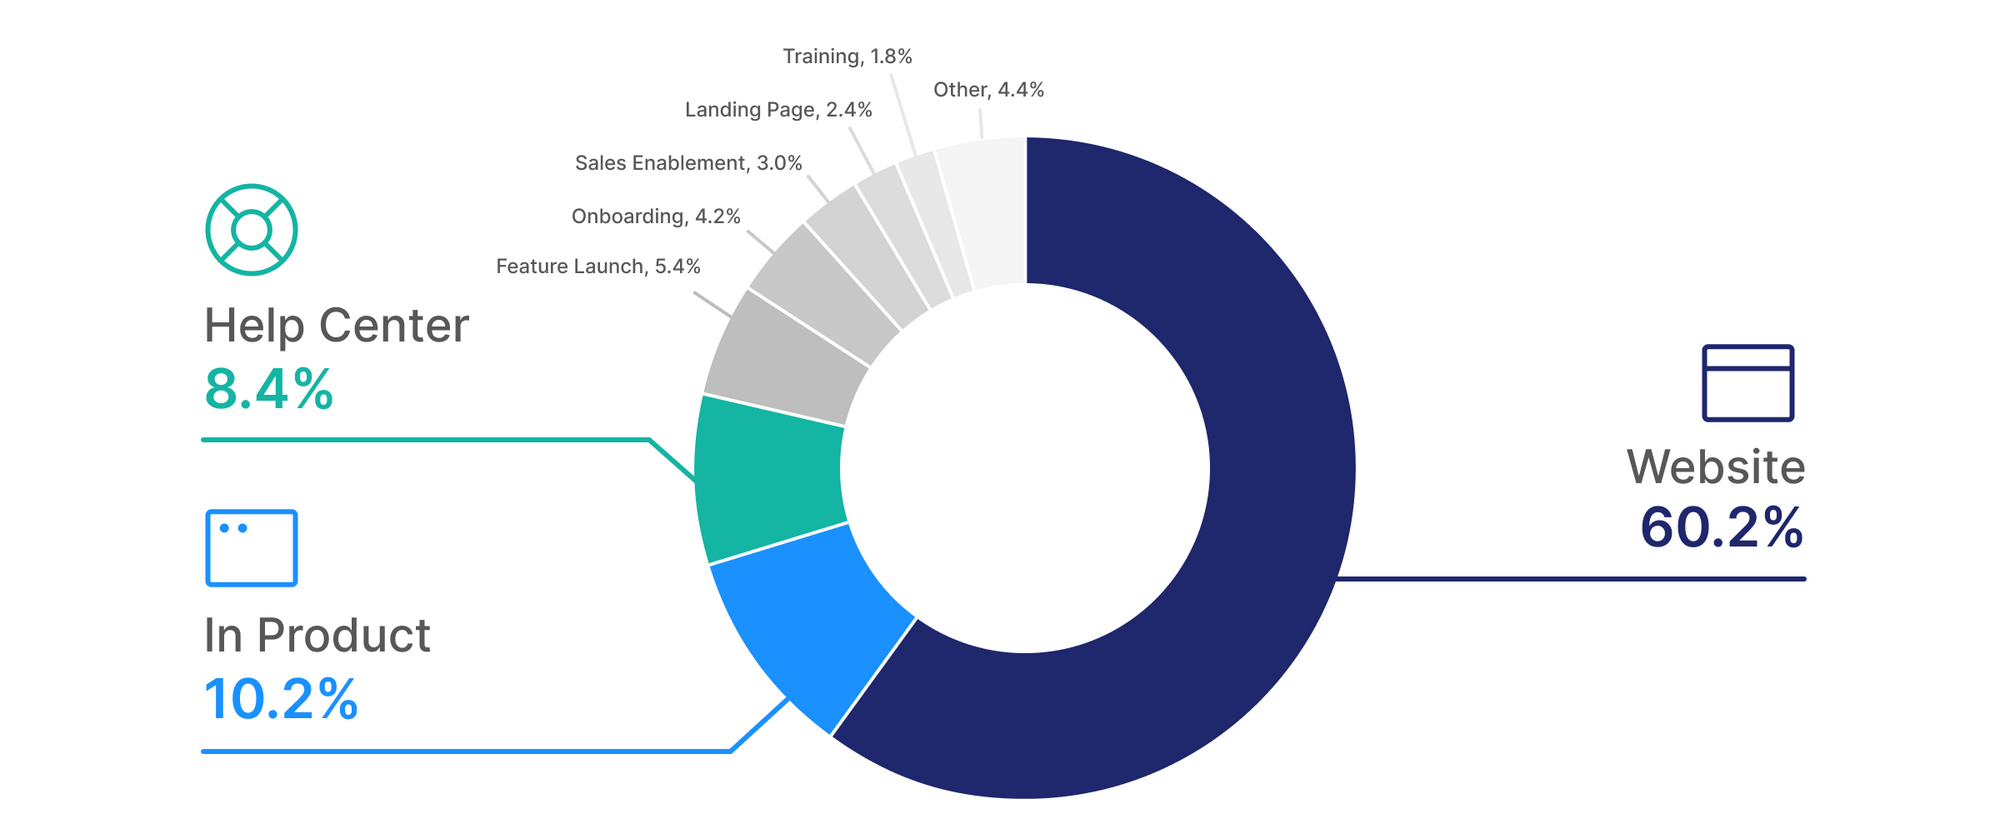 Use case breakdown for top 1% of interactive demos